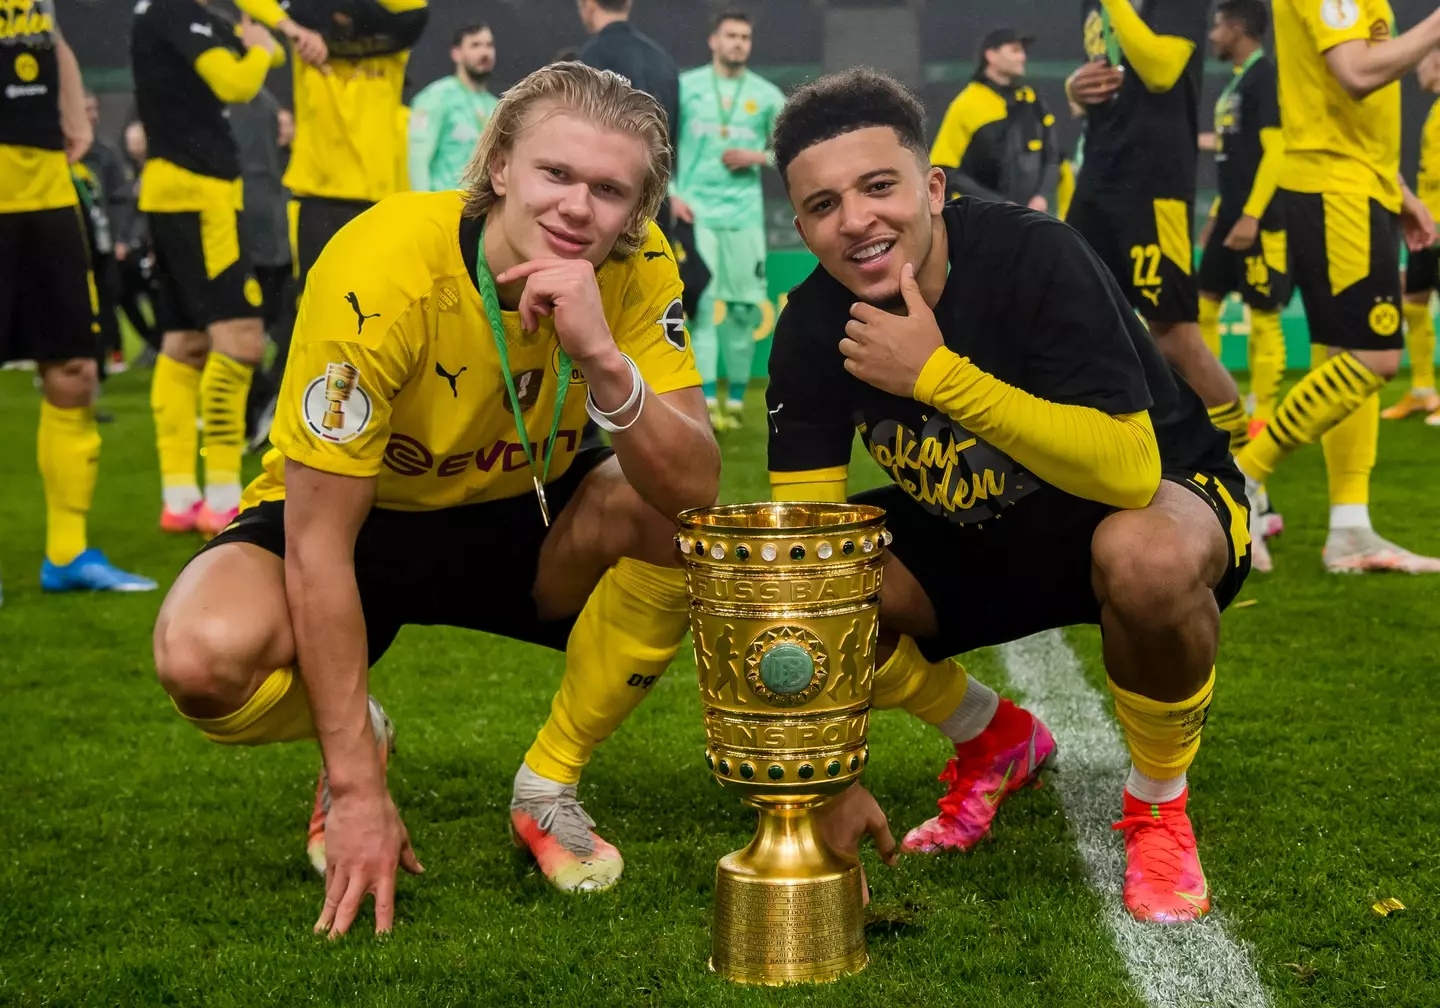 Haaland and Sancho played together at Borussia Dortmund (Image: Getty)